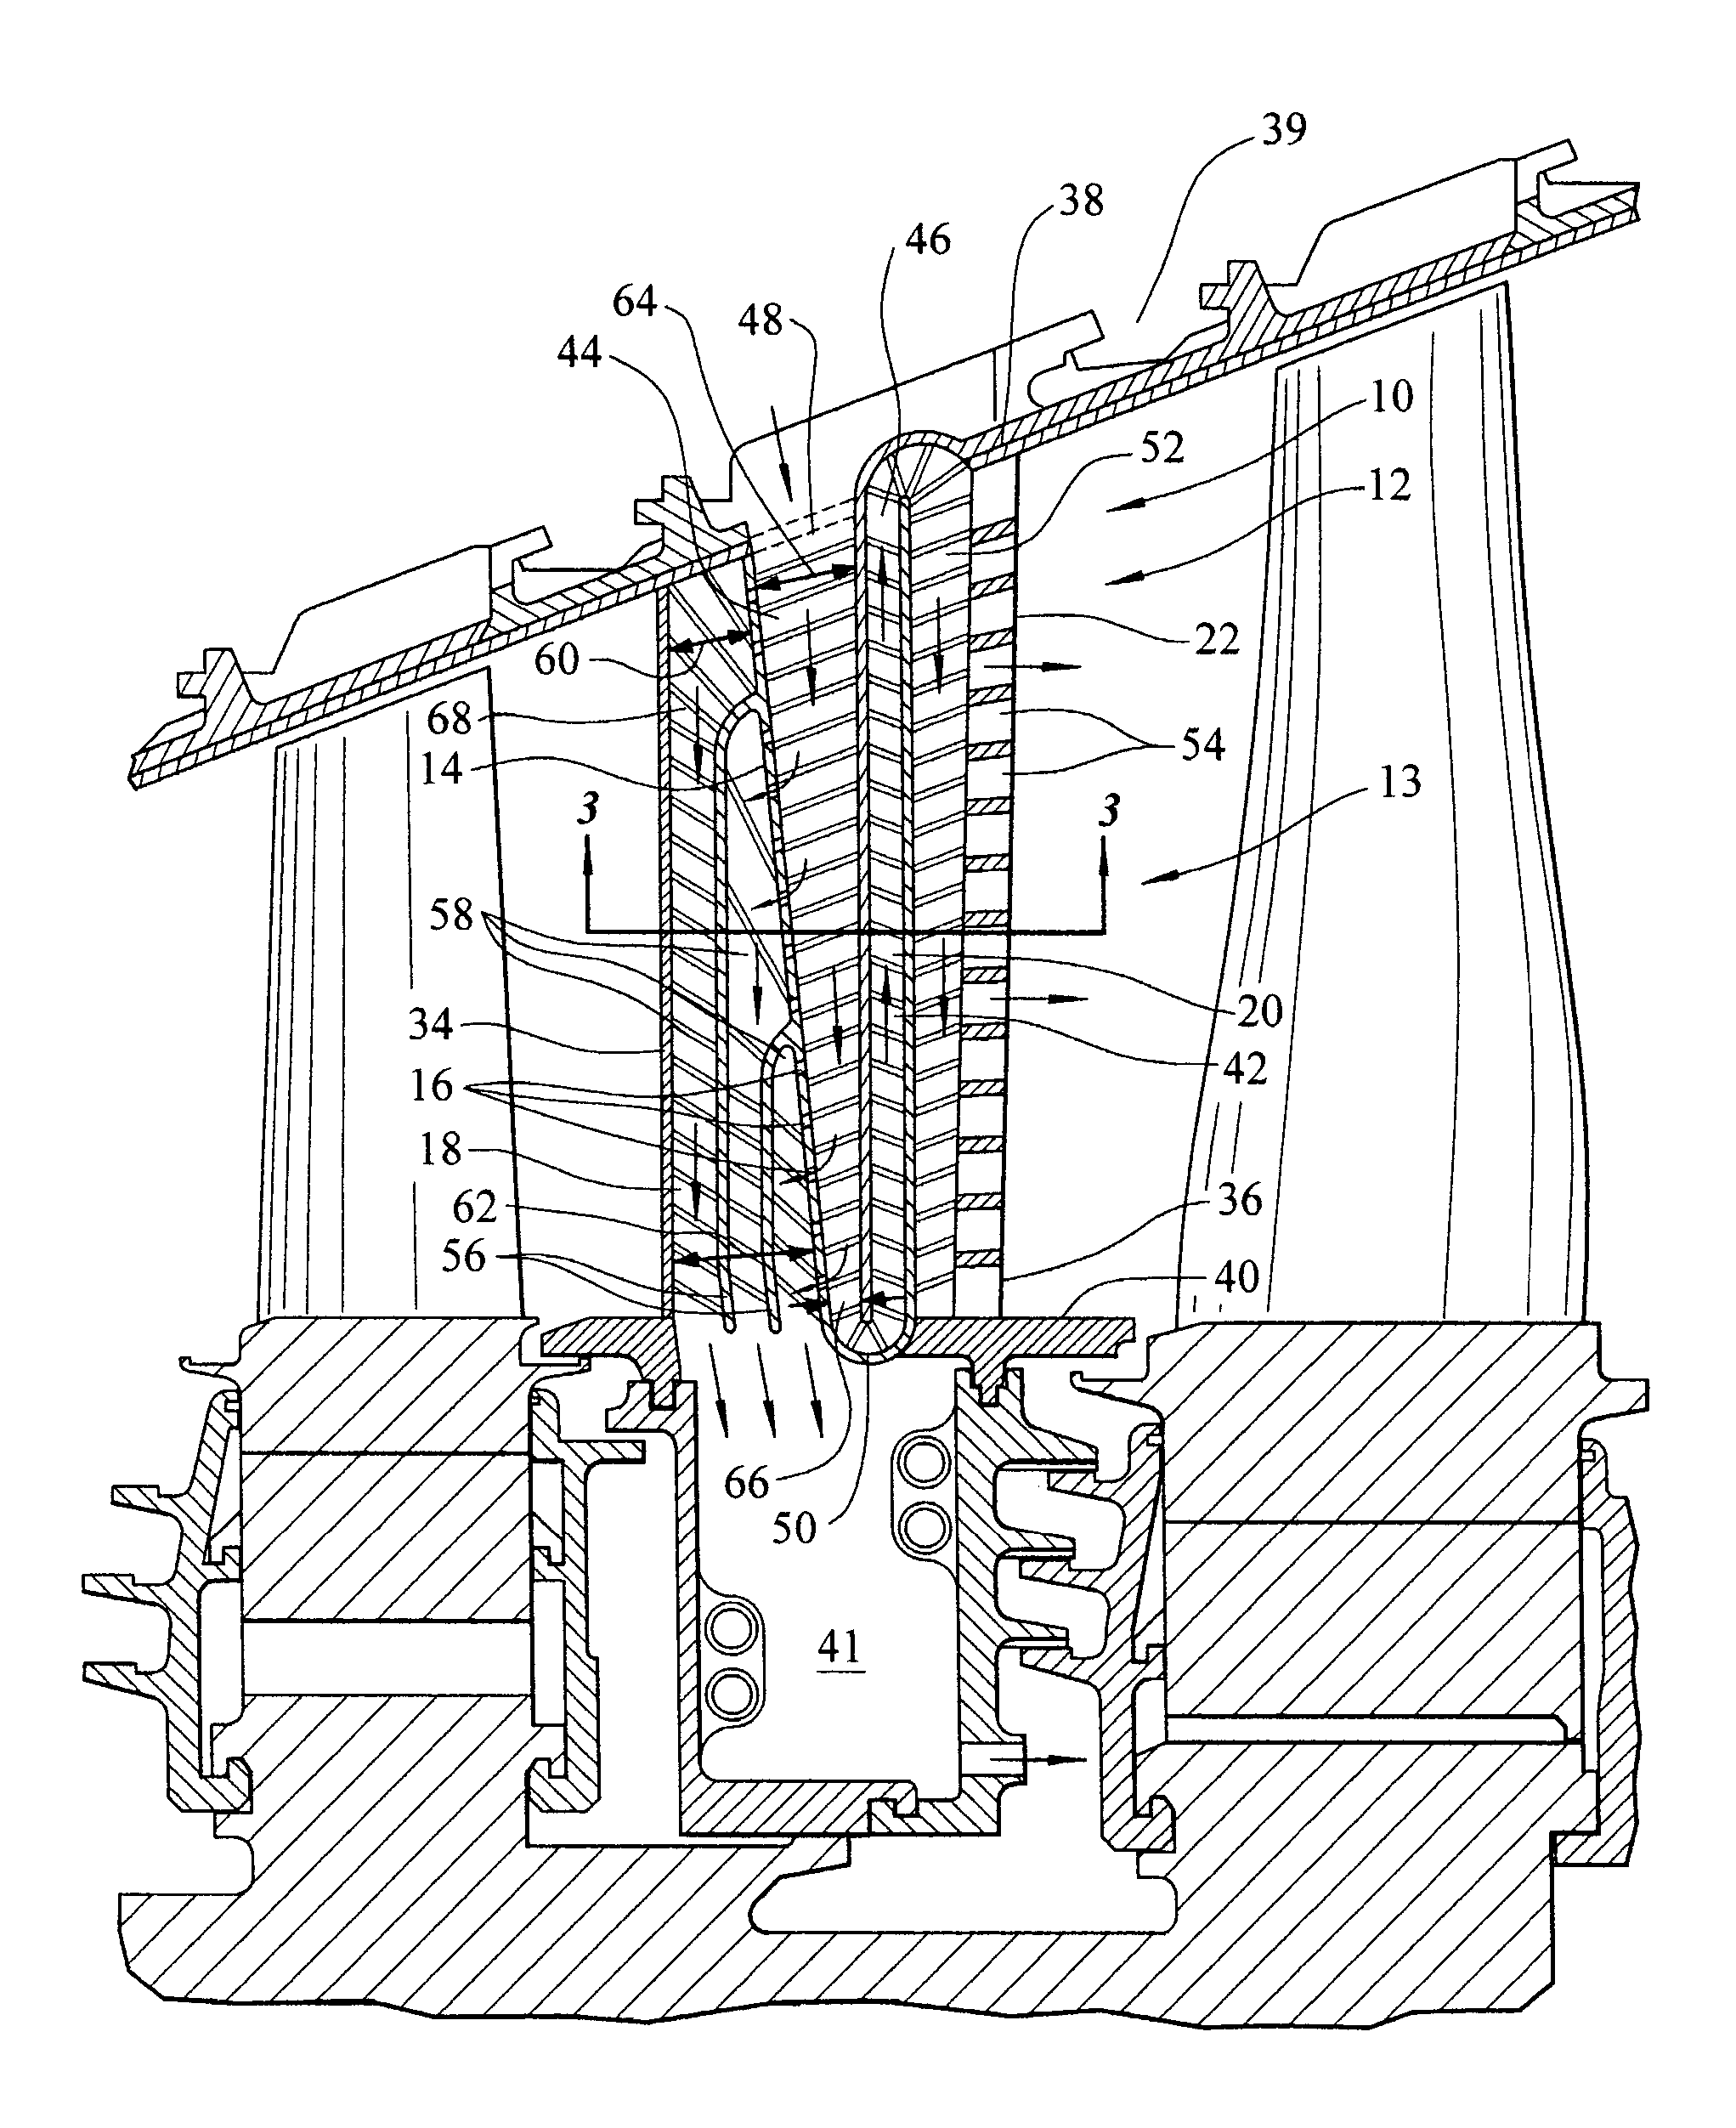 Gas turbine vane with integral cooling flow control system